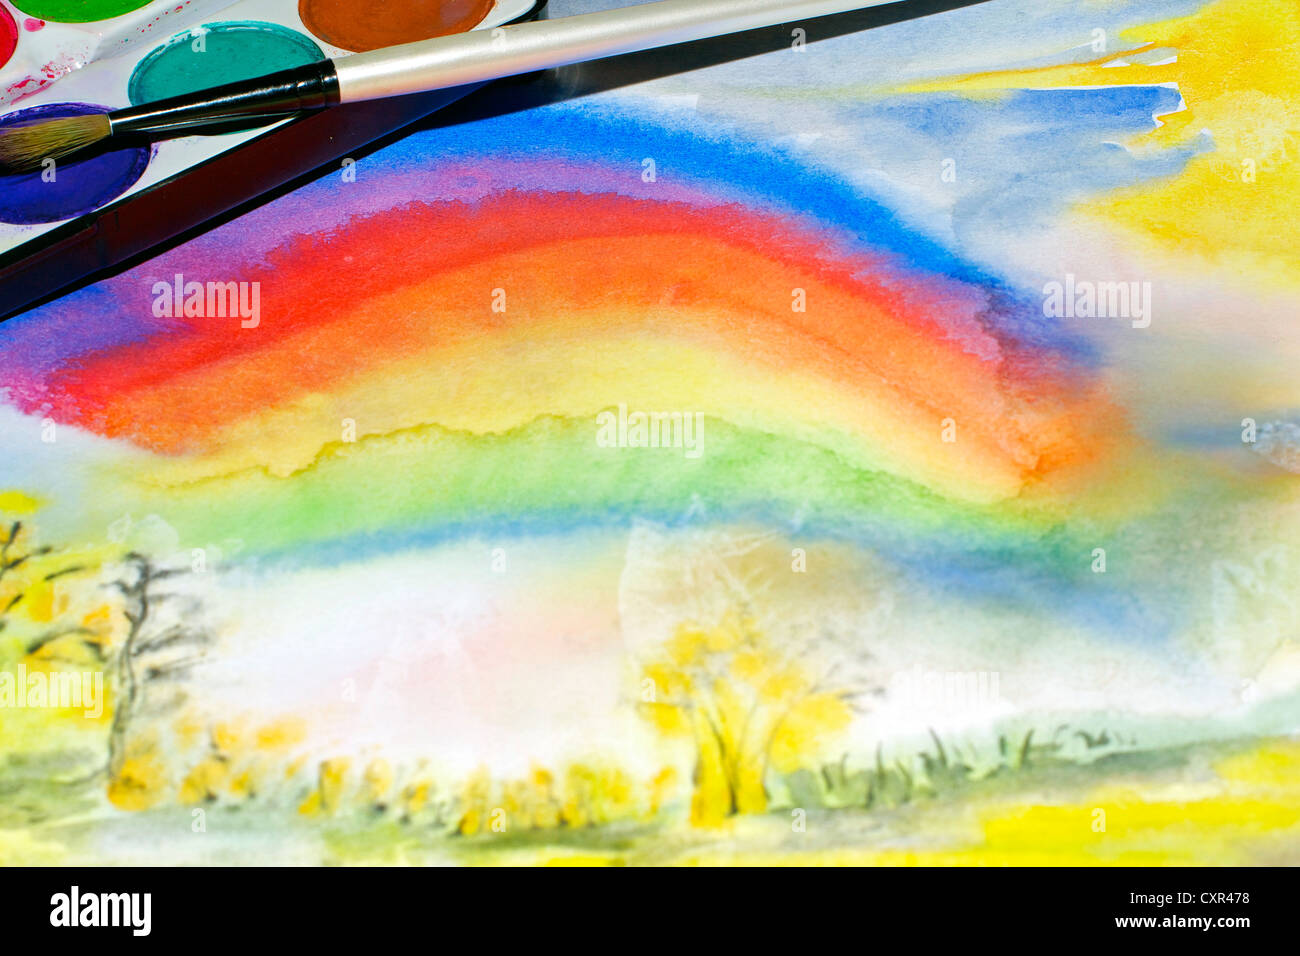 Abstract Child Art and aquarelle painting Stock Photo